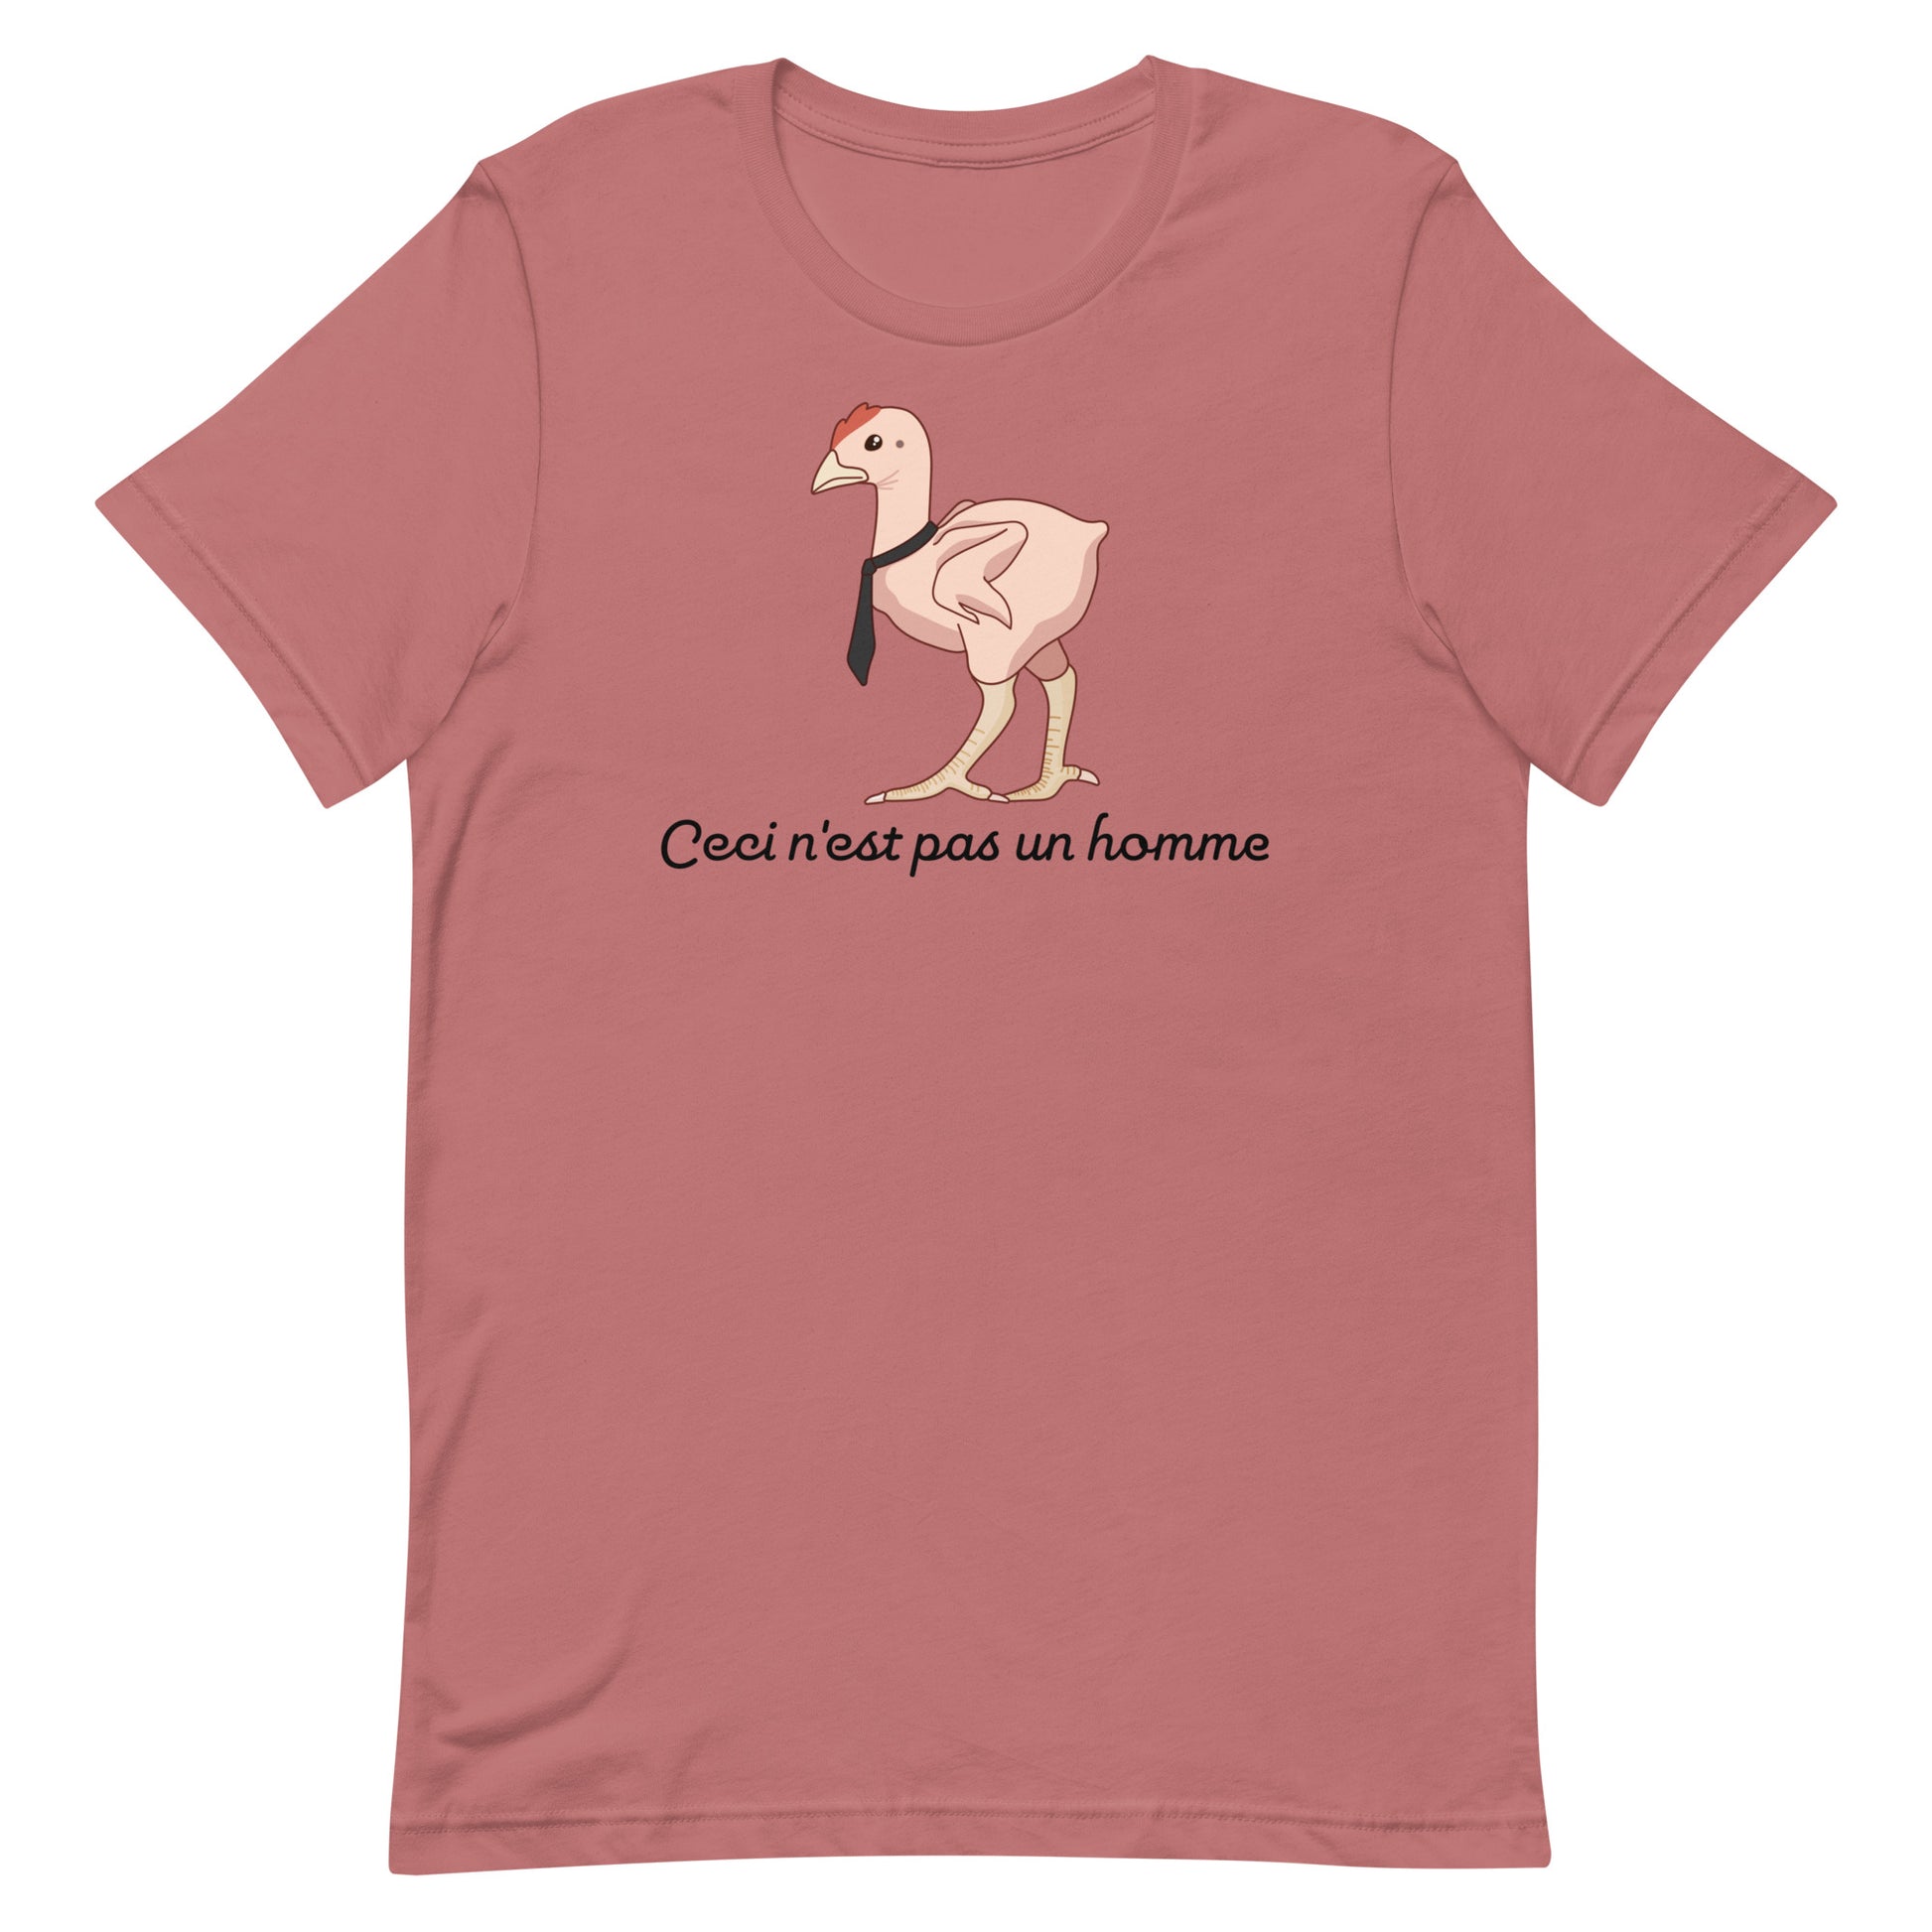 A dusky pink crewneck t-shirt featuring an illustration of a featherless chicken wearing a tie. Text underneath the chicken reads "Ceci n'est pas un homme" in a cursive font.